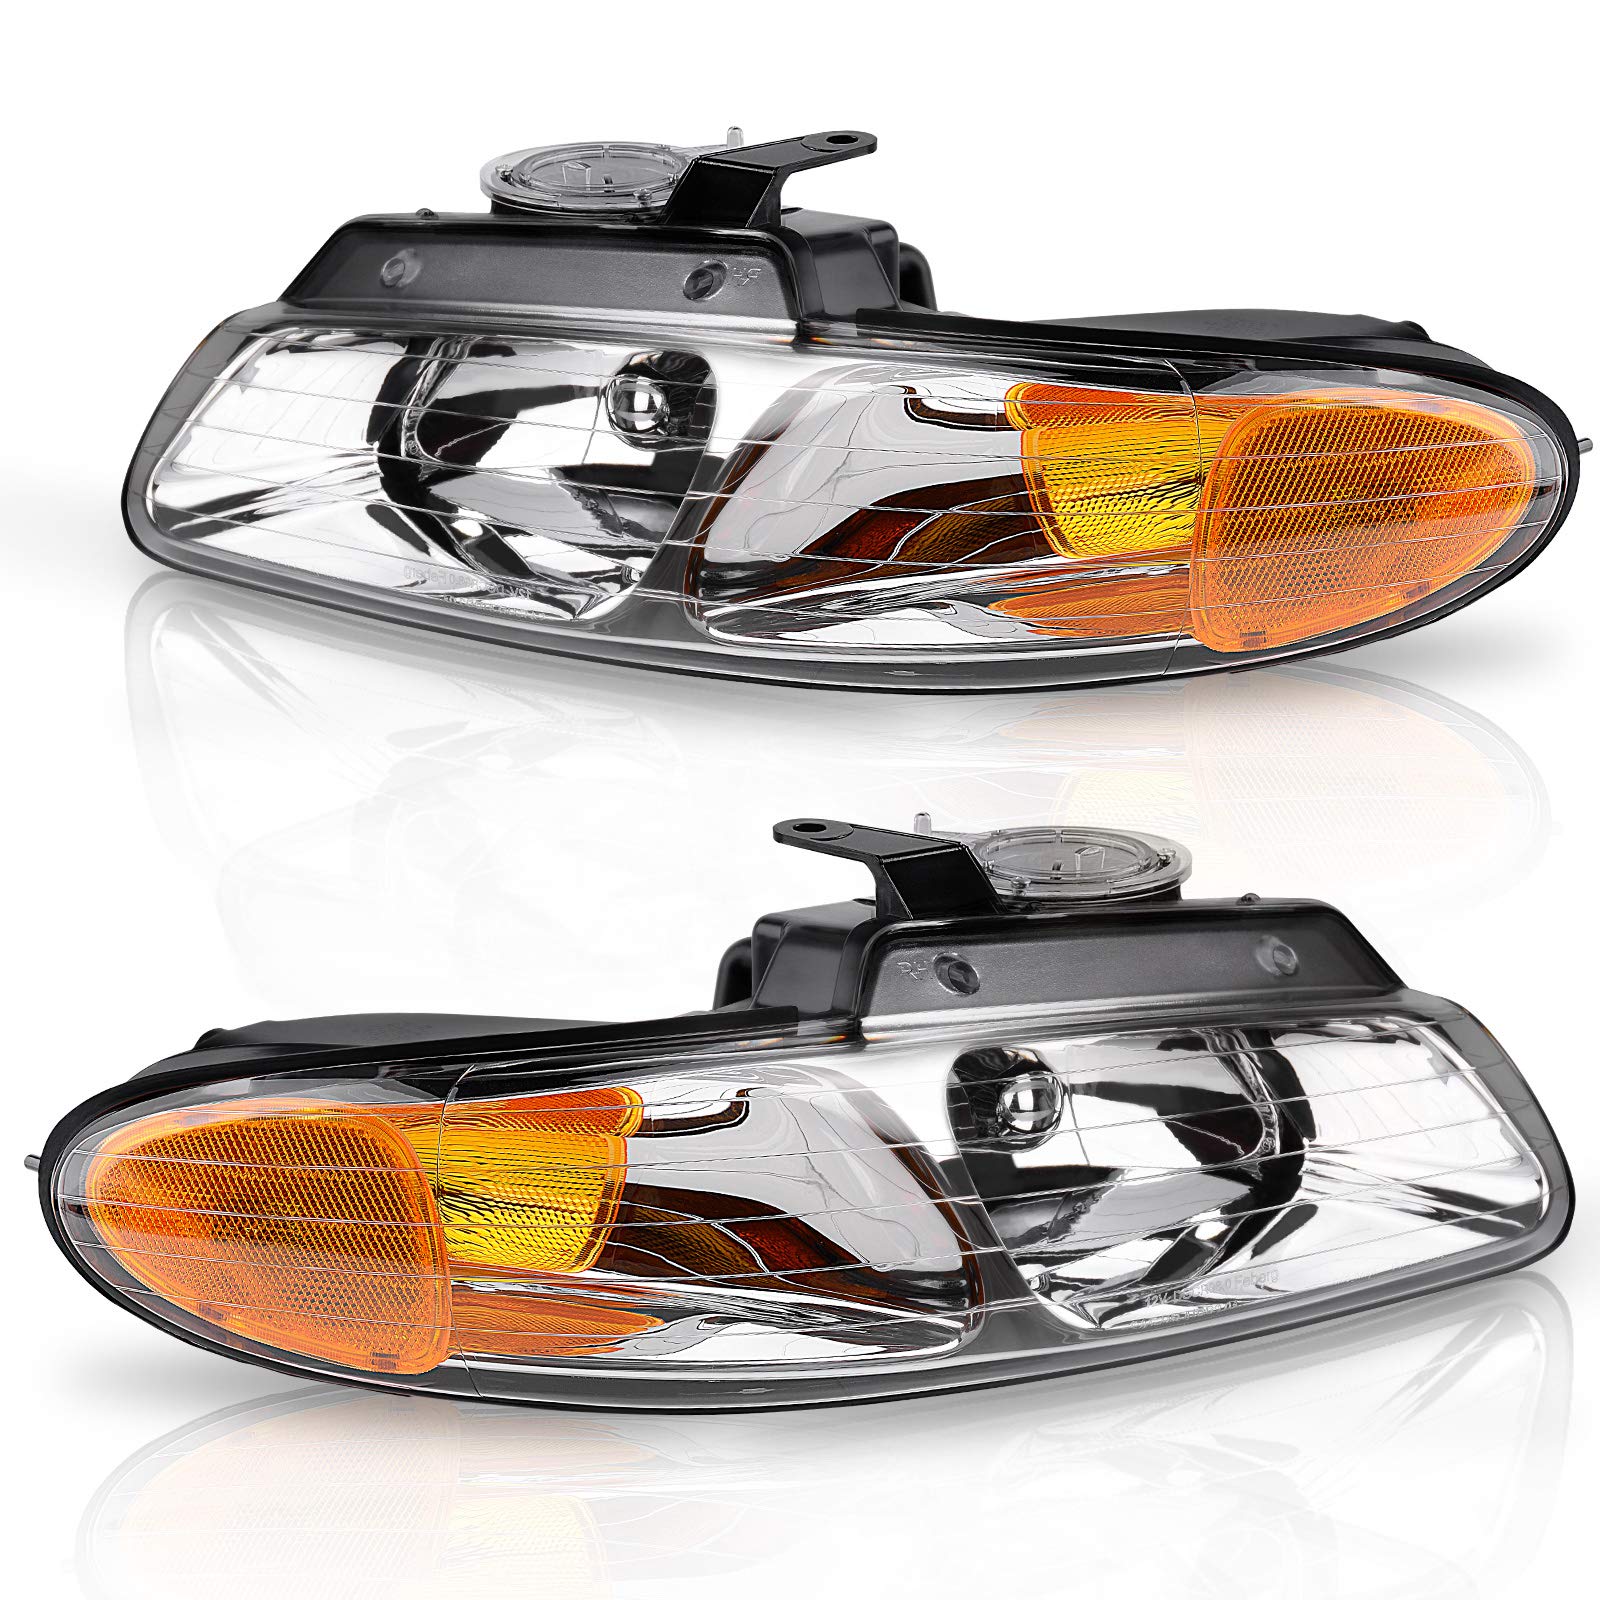 Amazon.com: DWVO Headlight Assembly Compatible with 1996-1999 Dodge  Caravan/Grand Caravan / 96-99 Chrysler Town and Country / 1996 1997 1998  1999 Plymouth Voyager/ Grand Voyager : Automotive